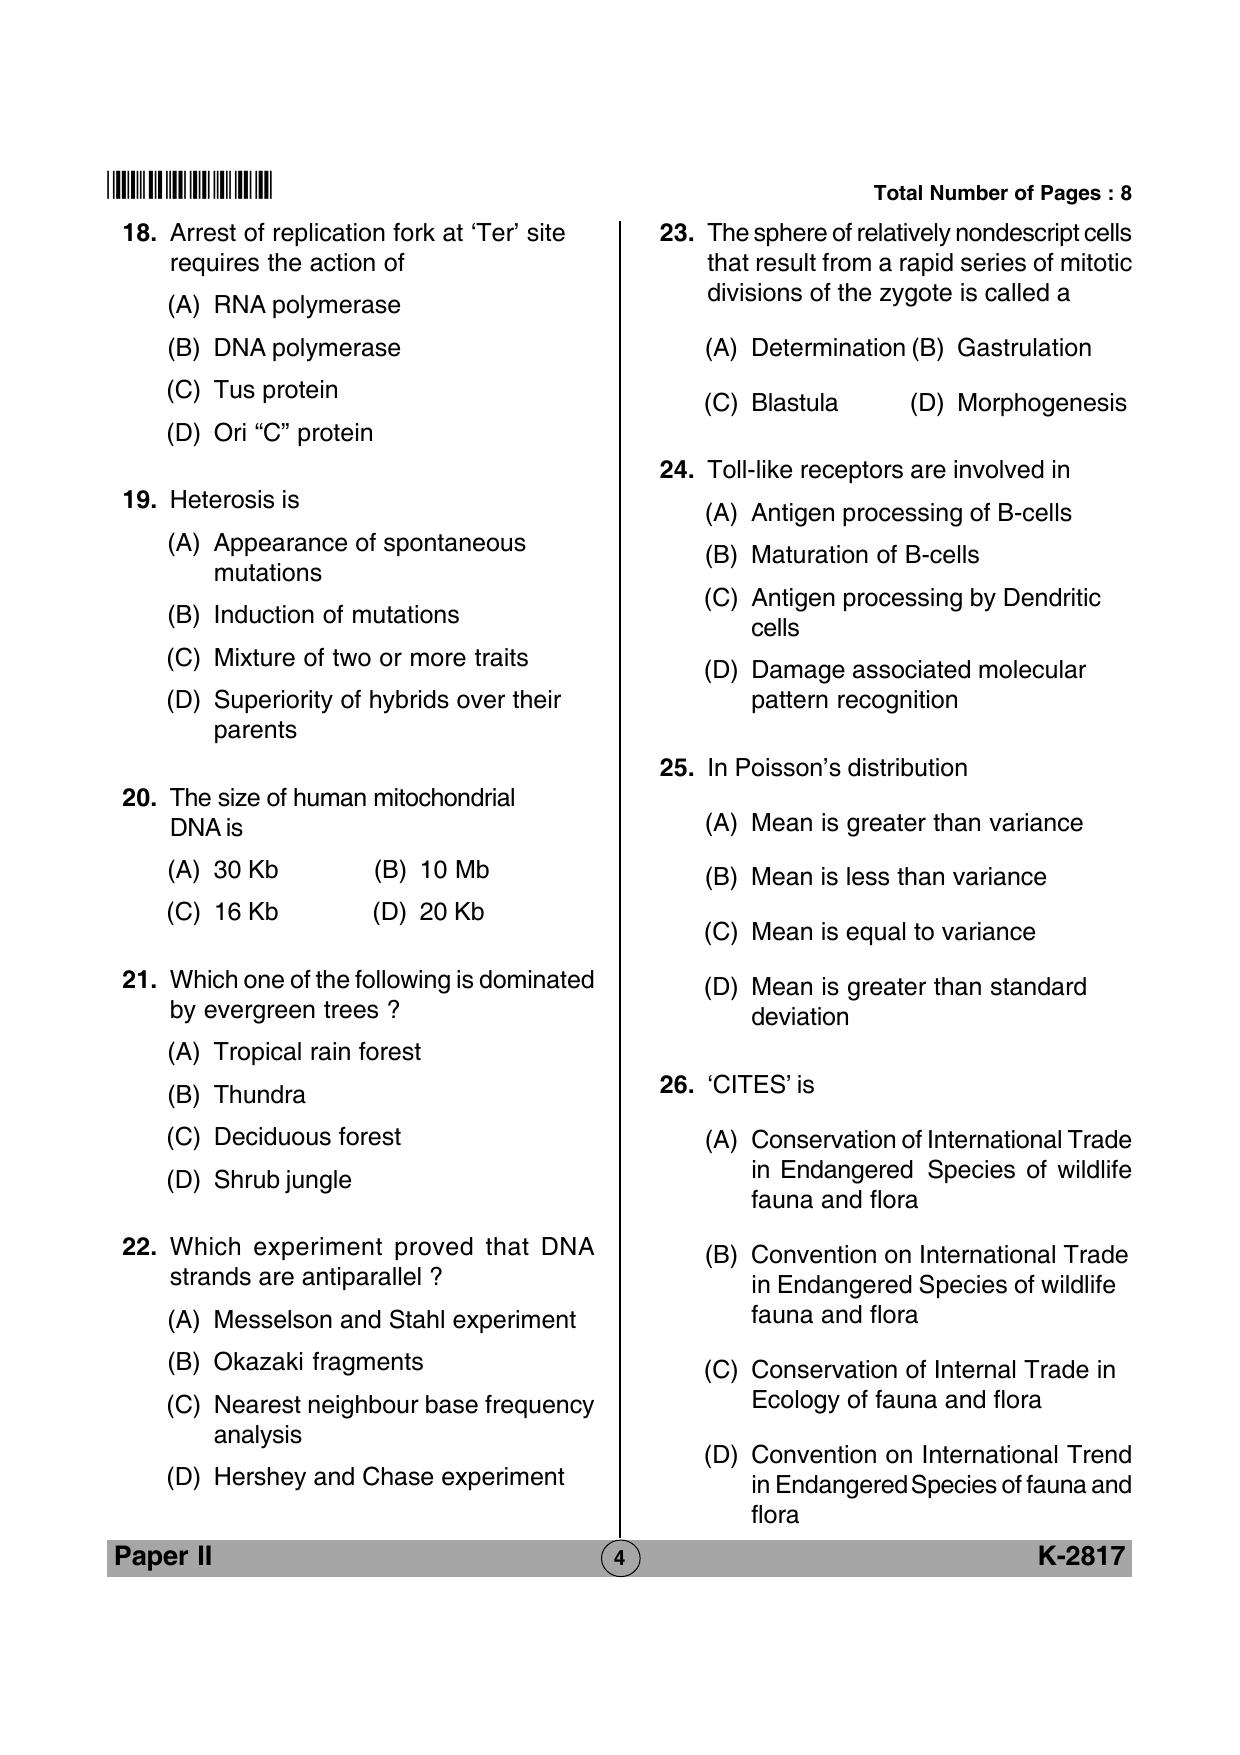 Life Sciences VCRC Sample Papers - Page 4